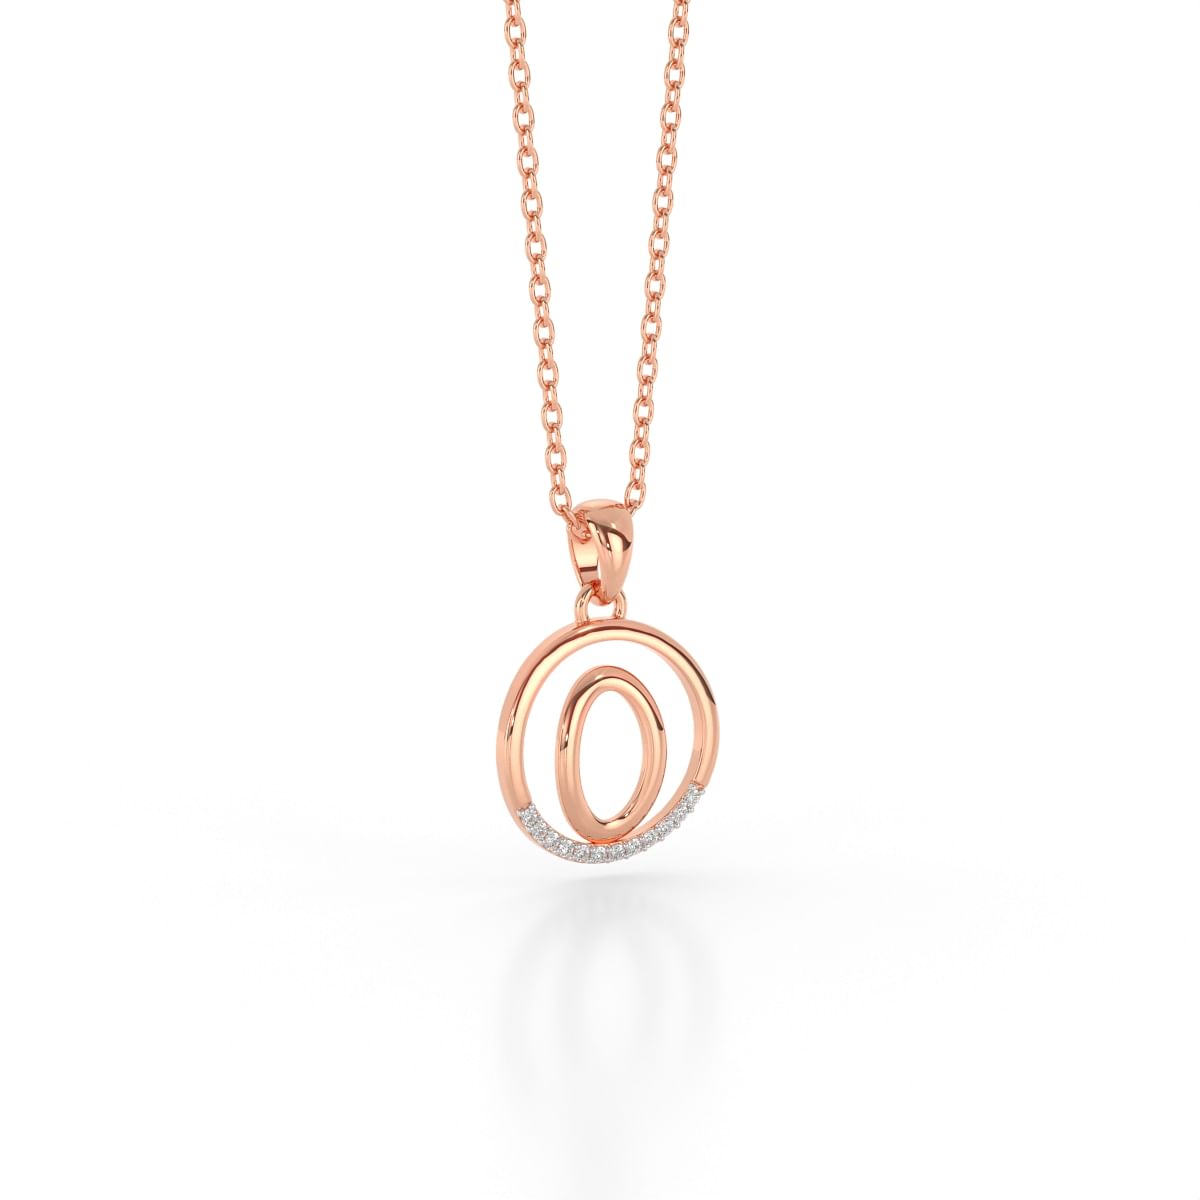 9ct Yellow Gold Diamond Initial O Pendant Necklace - London Road Jewellery